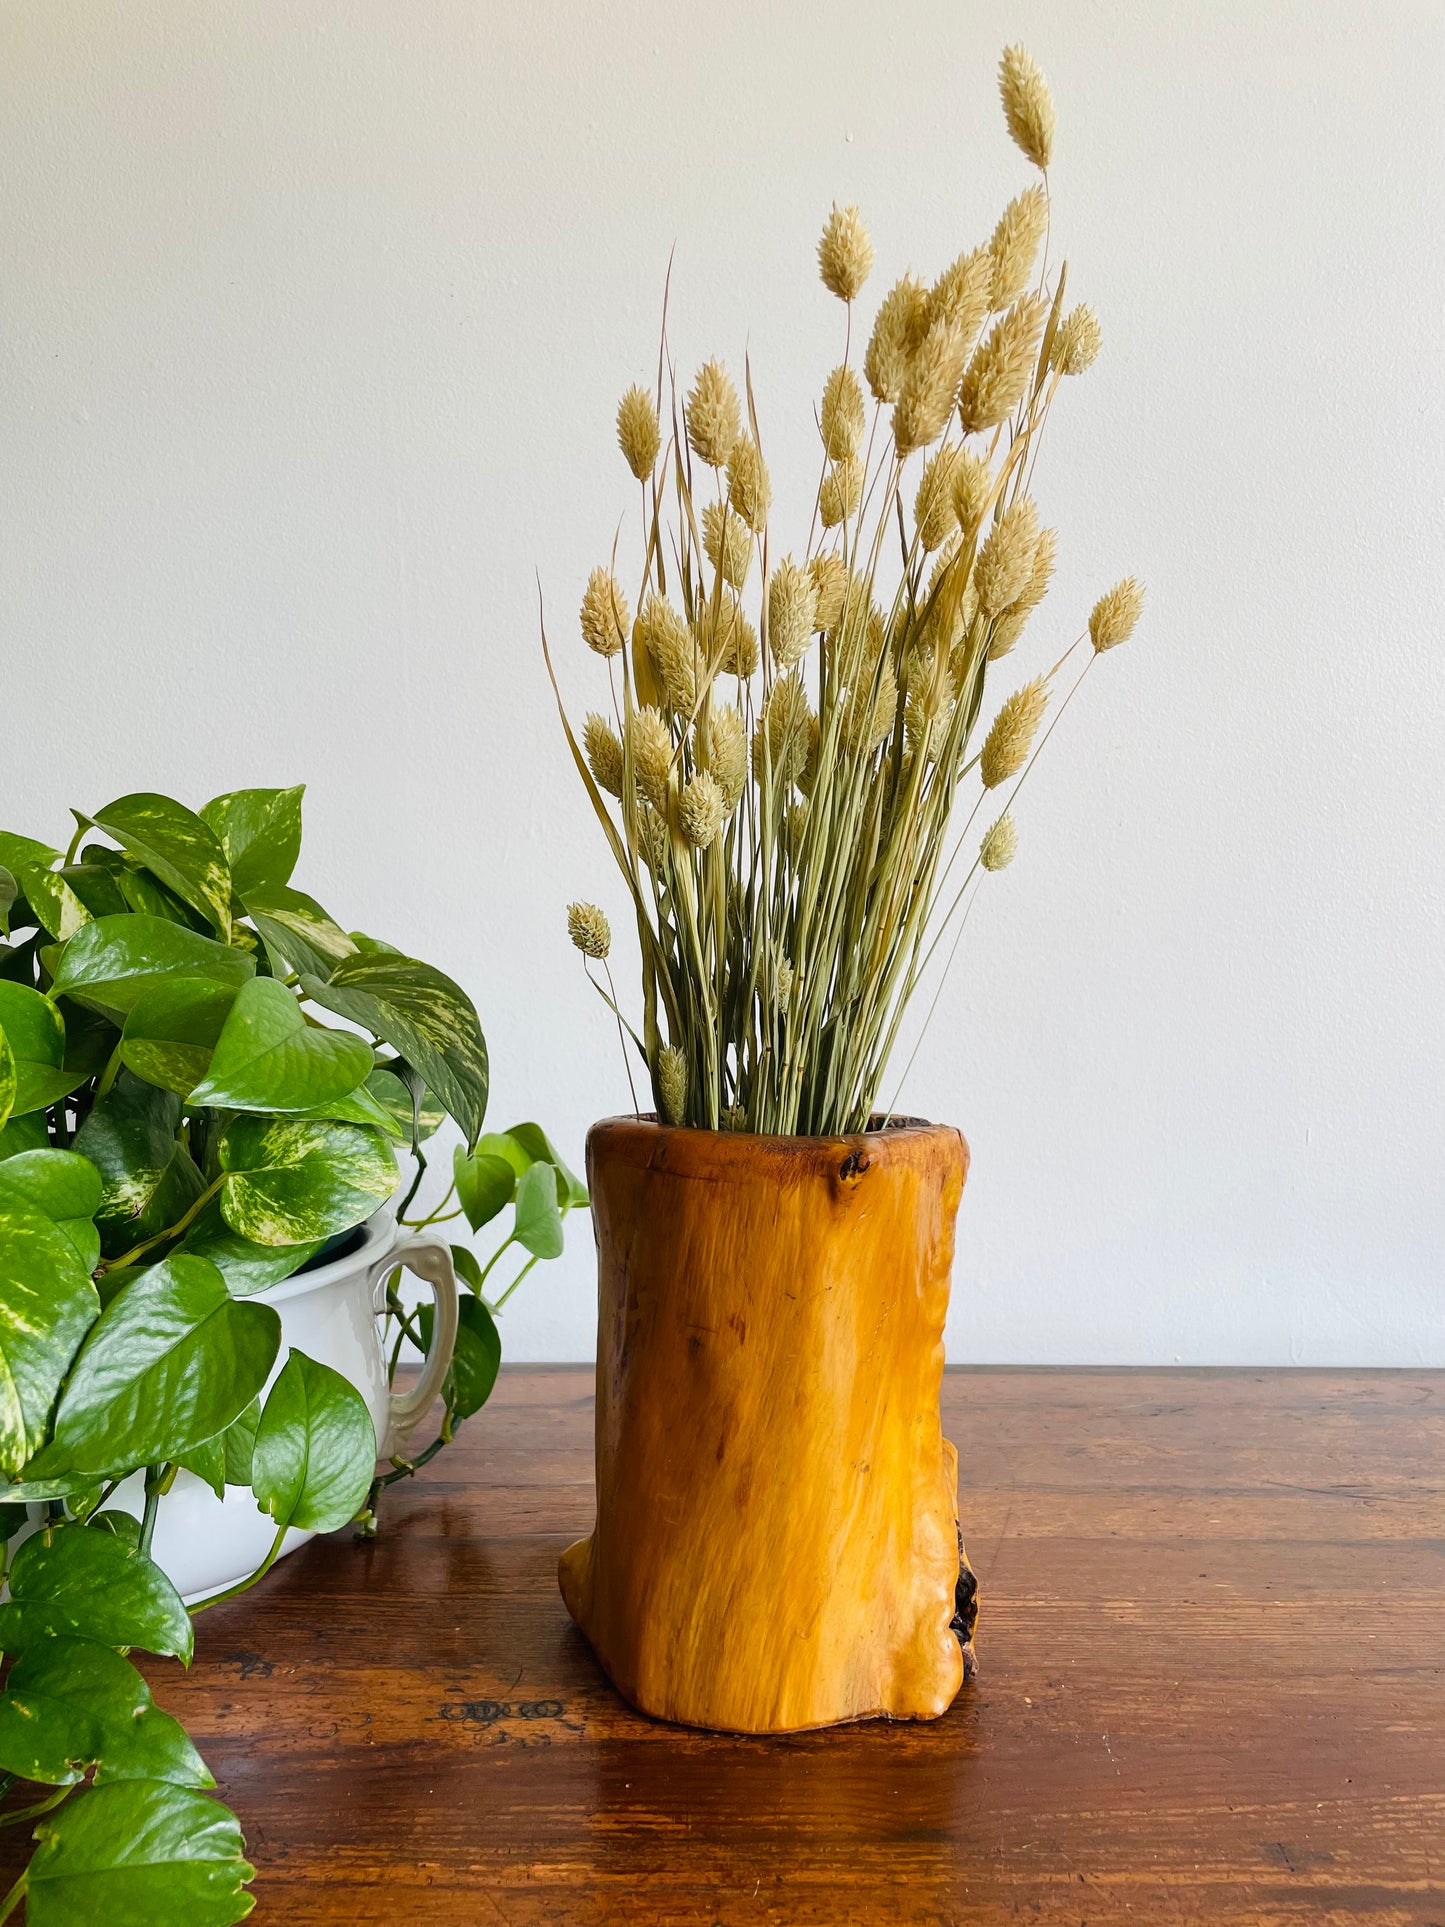 Incredibly Unique Vase made from a Tree Branch with Glass Canister Inside